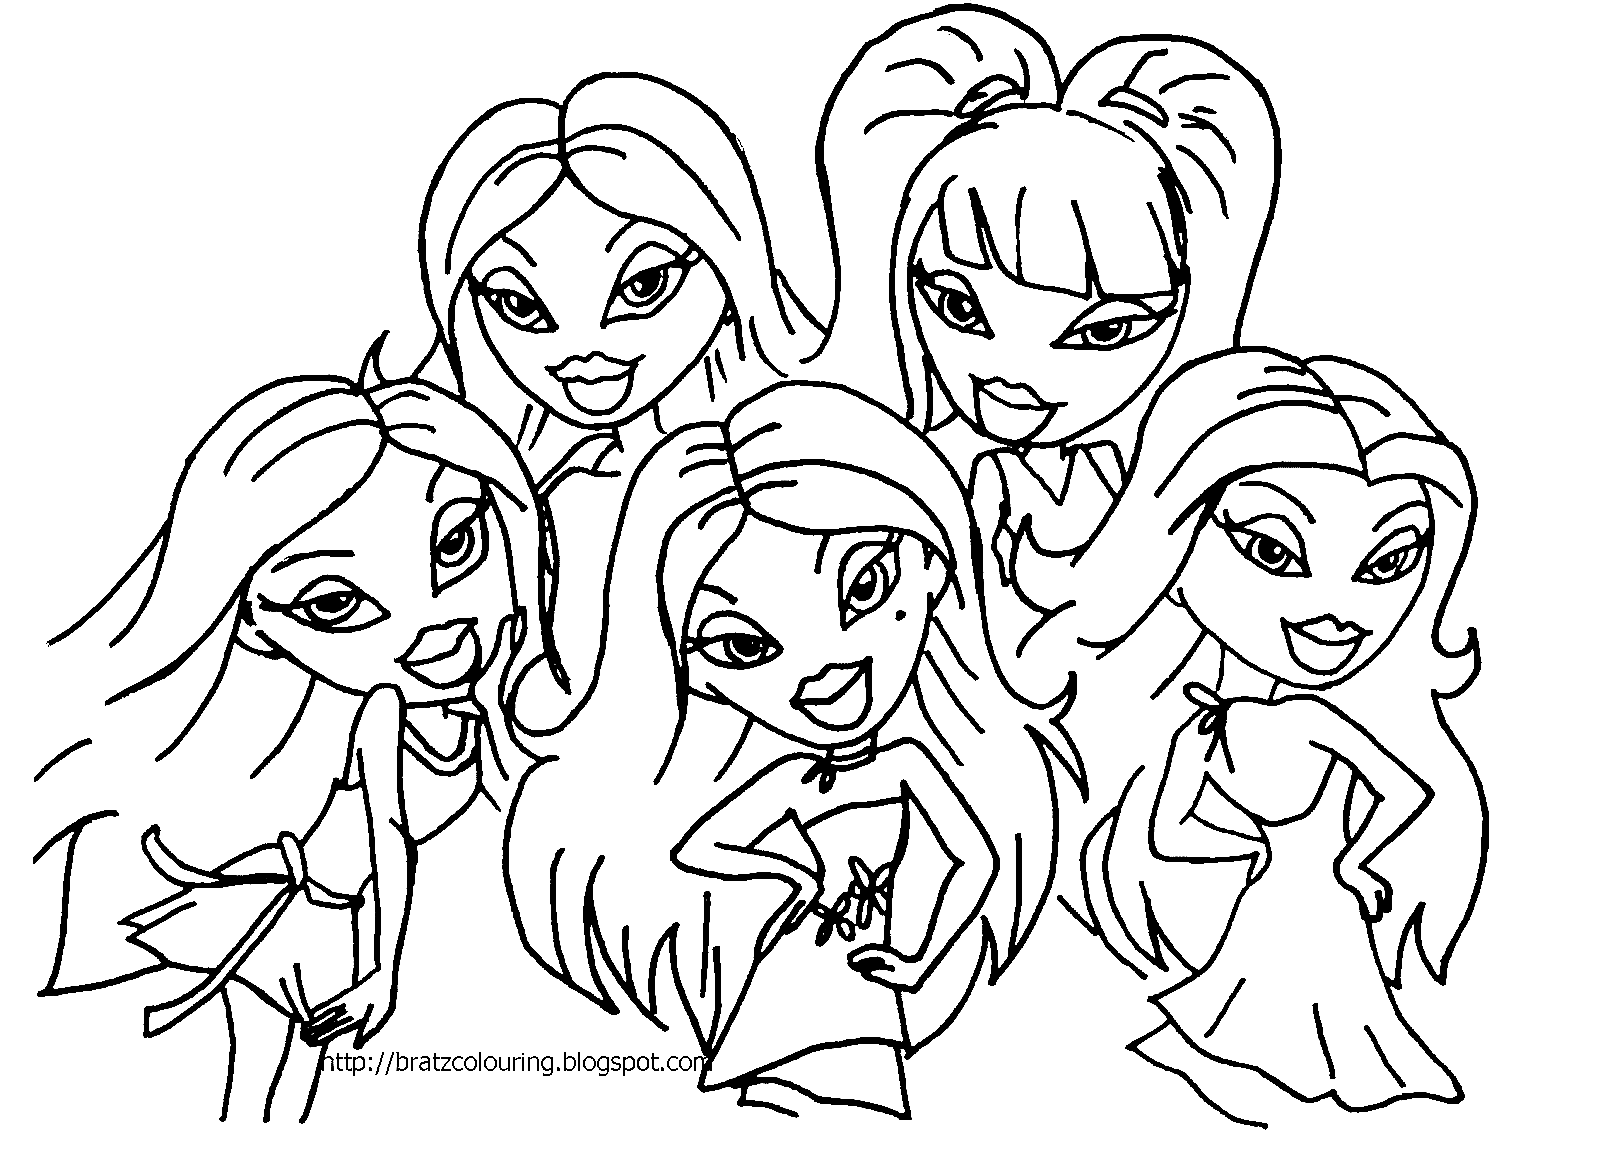 Bratz: Coloring Book for Kids and Adults with Fun, Easy, An Amazing  Coloring Book For Relaxation